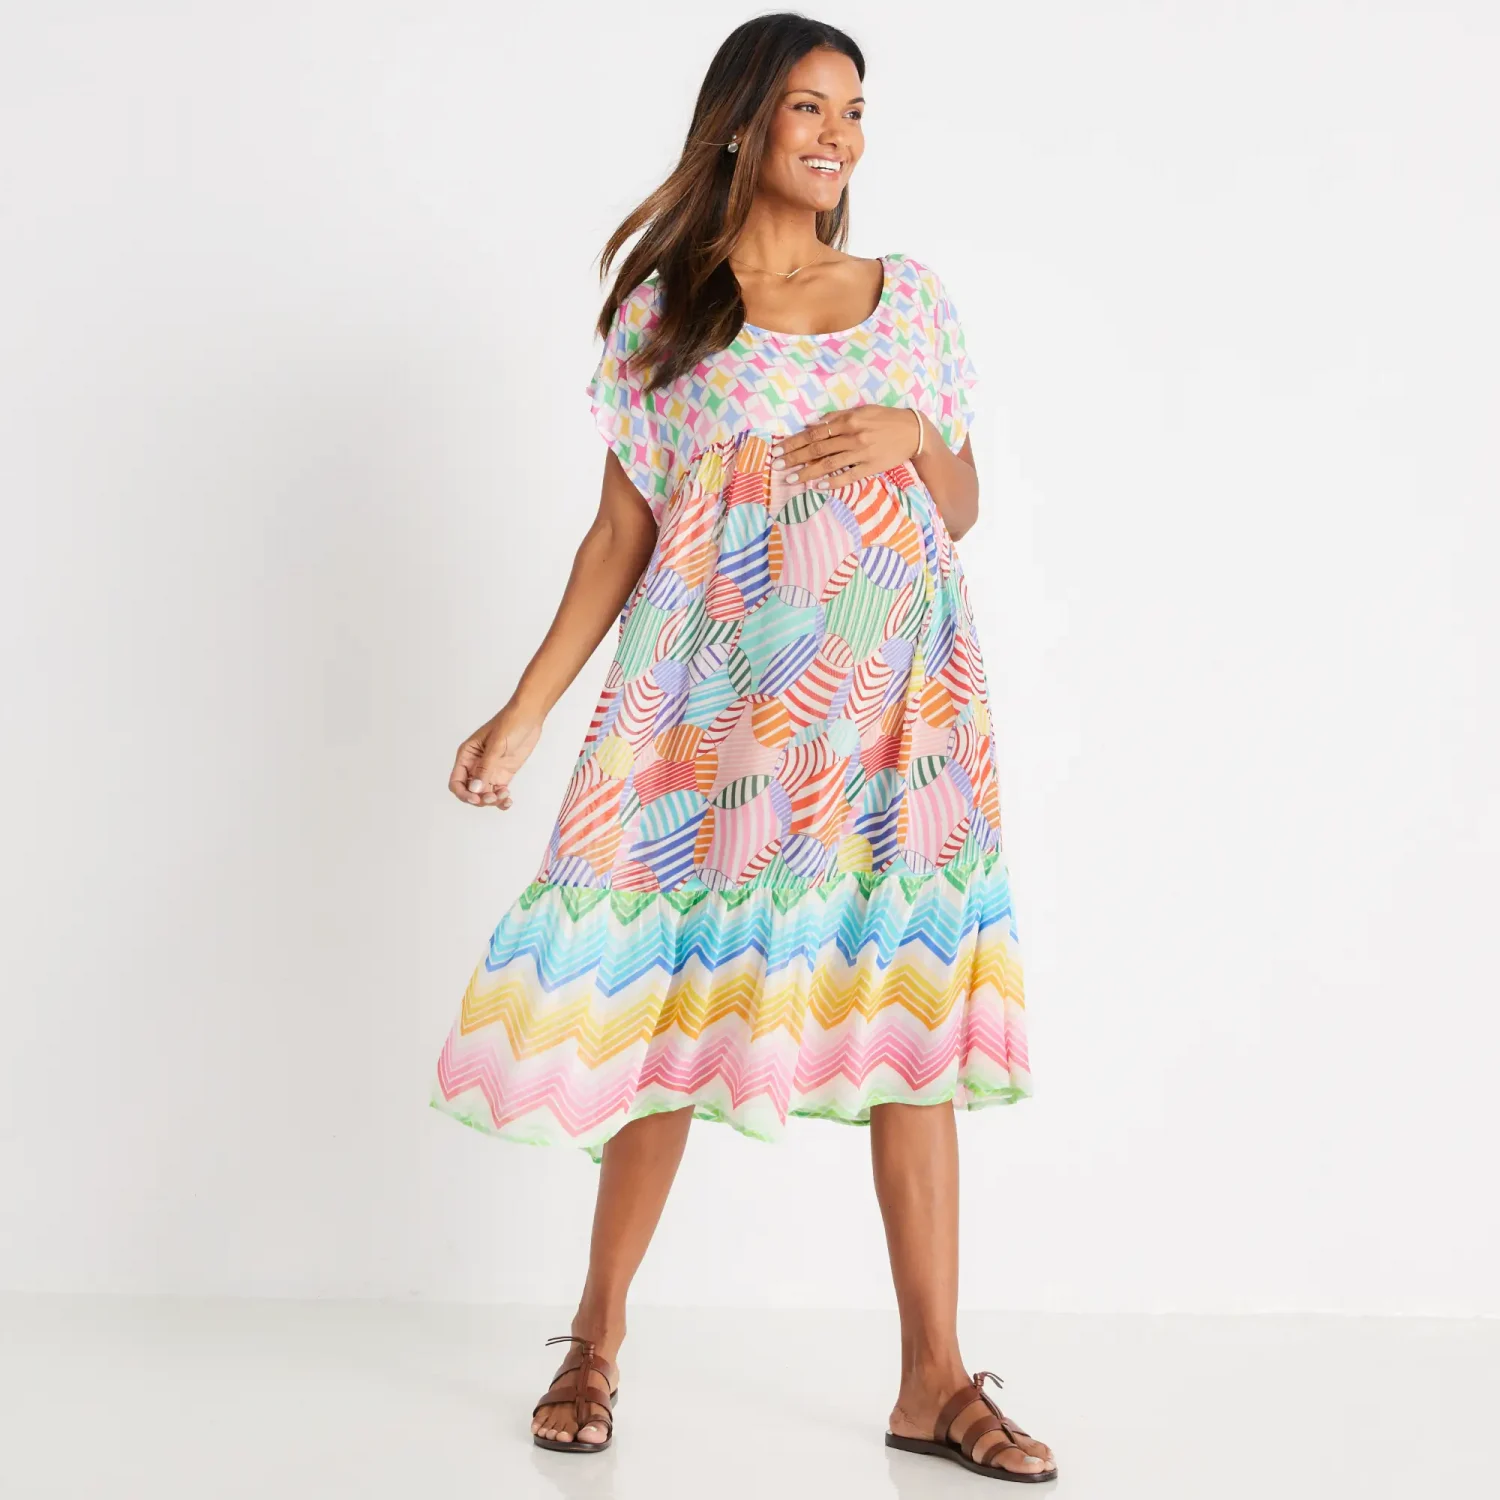 Me369 brand contemporary and stylish maternity friendly printed cover up dresses